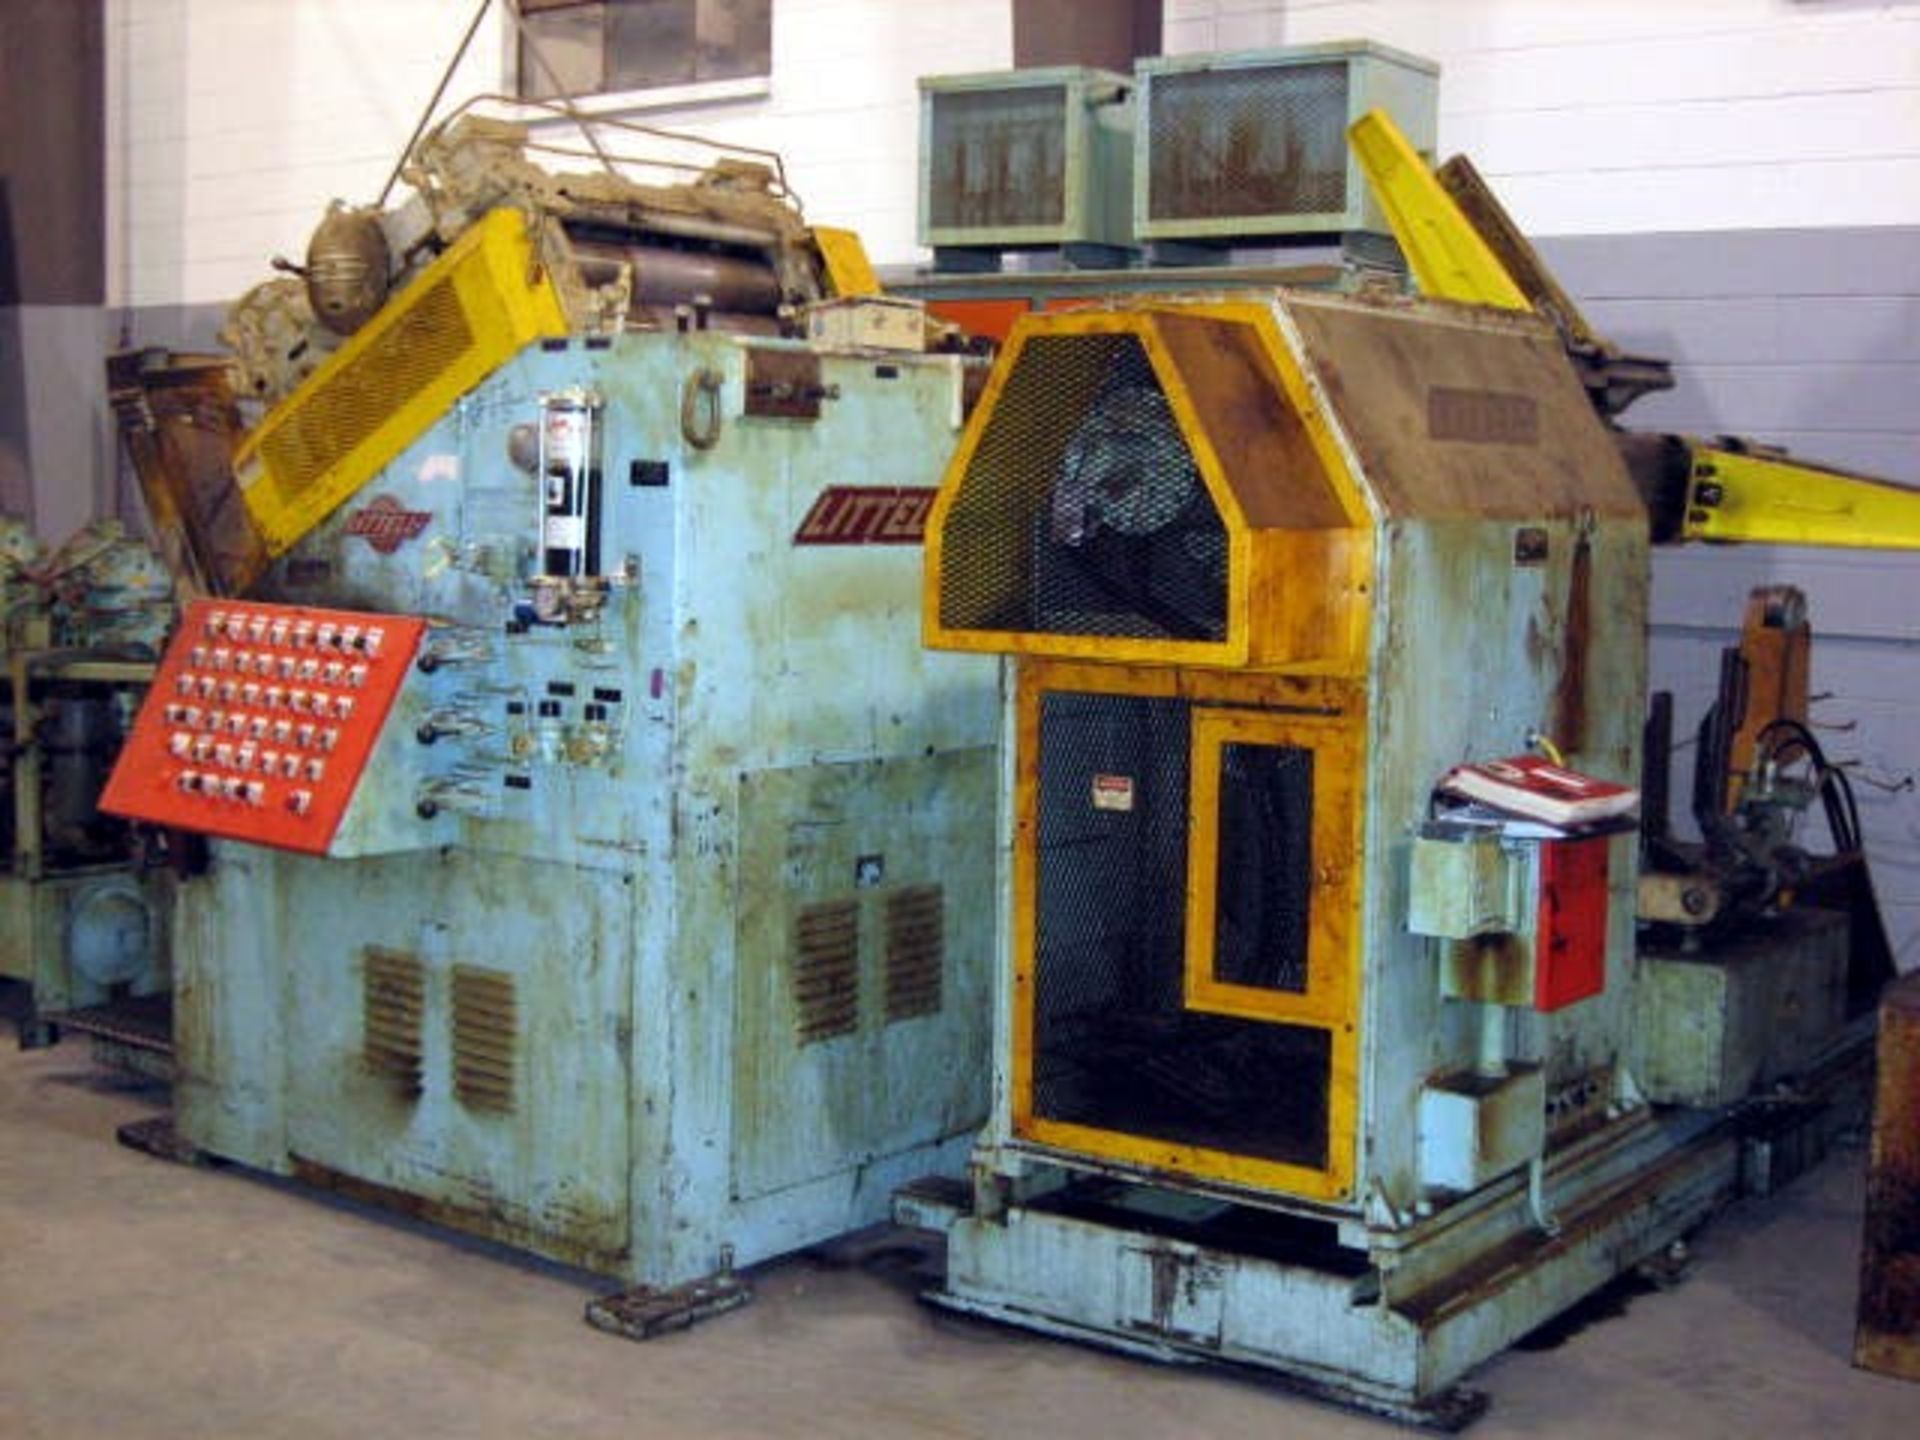 LITTELL 26" X .250 x 20,000# "SPACE SAVER" REVERSE LOOP COIL LINE, SN 86066,86067-80, YEAR 1980